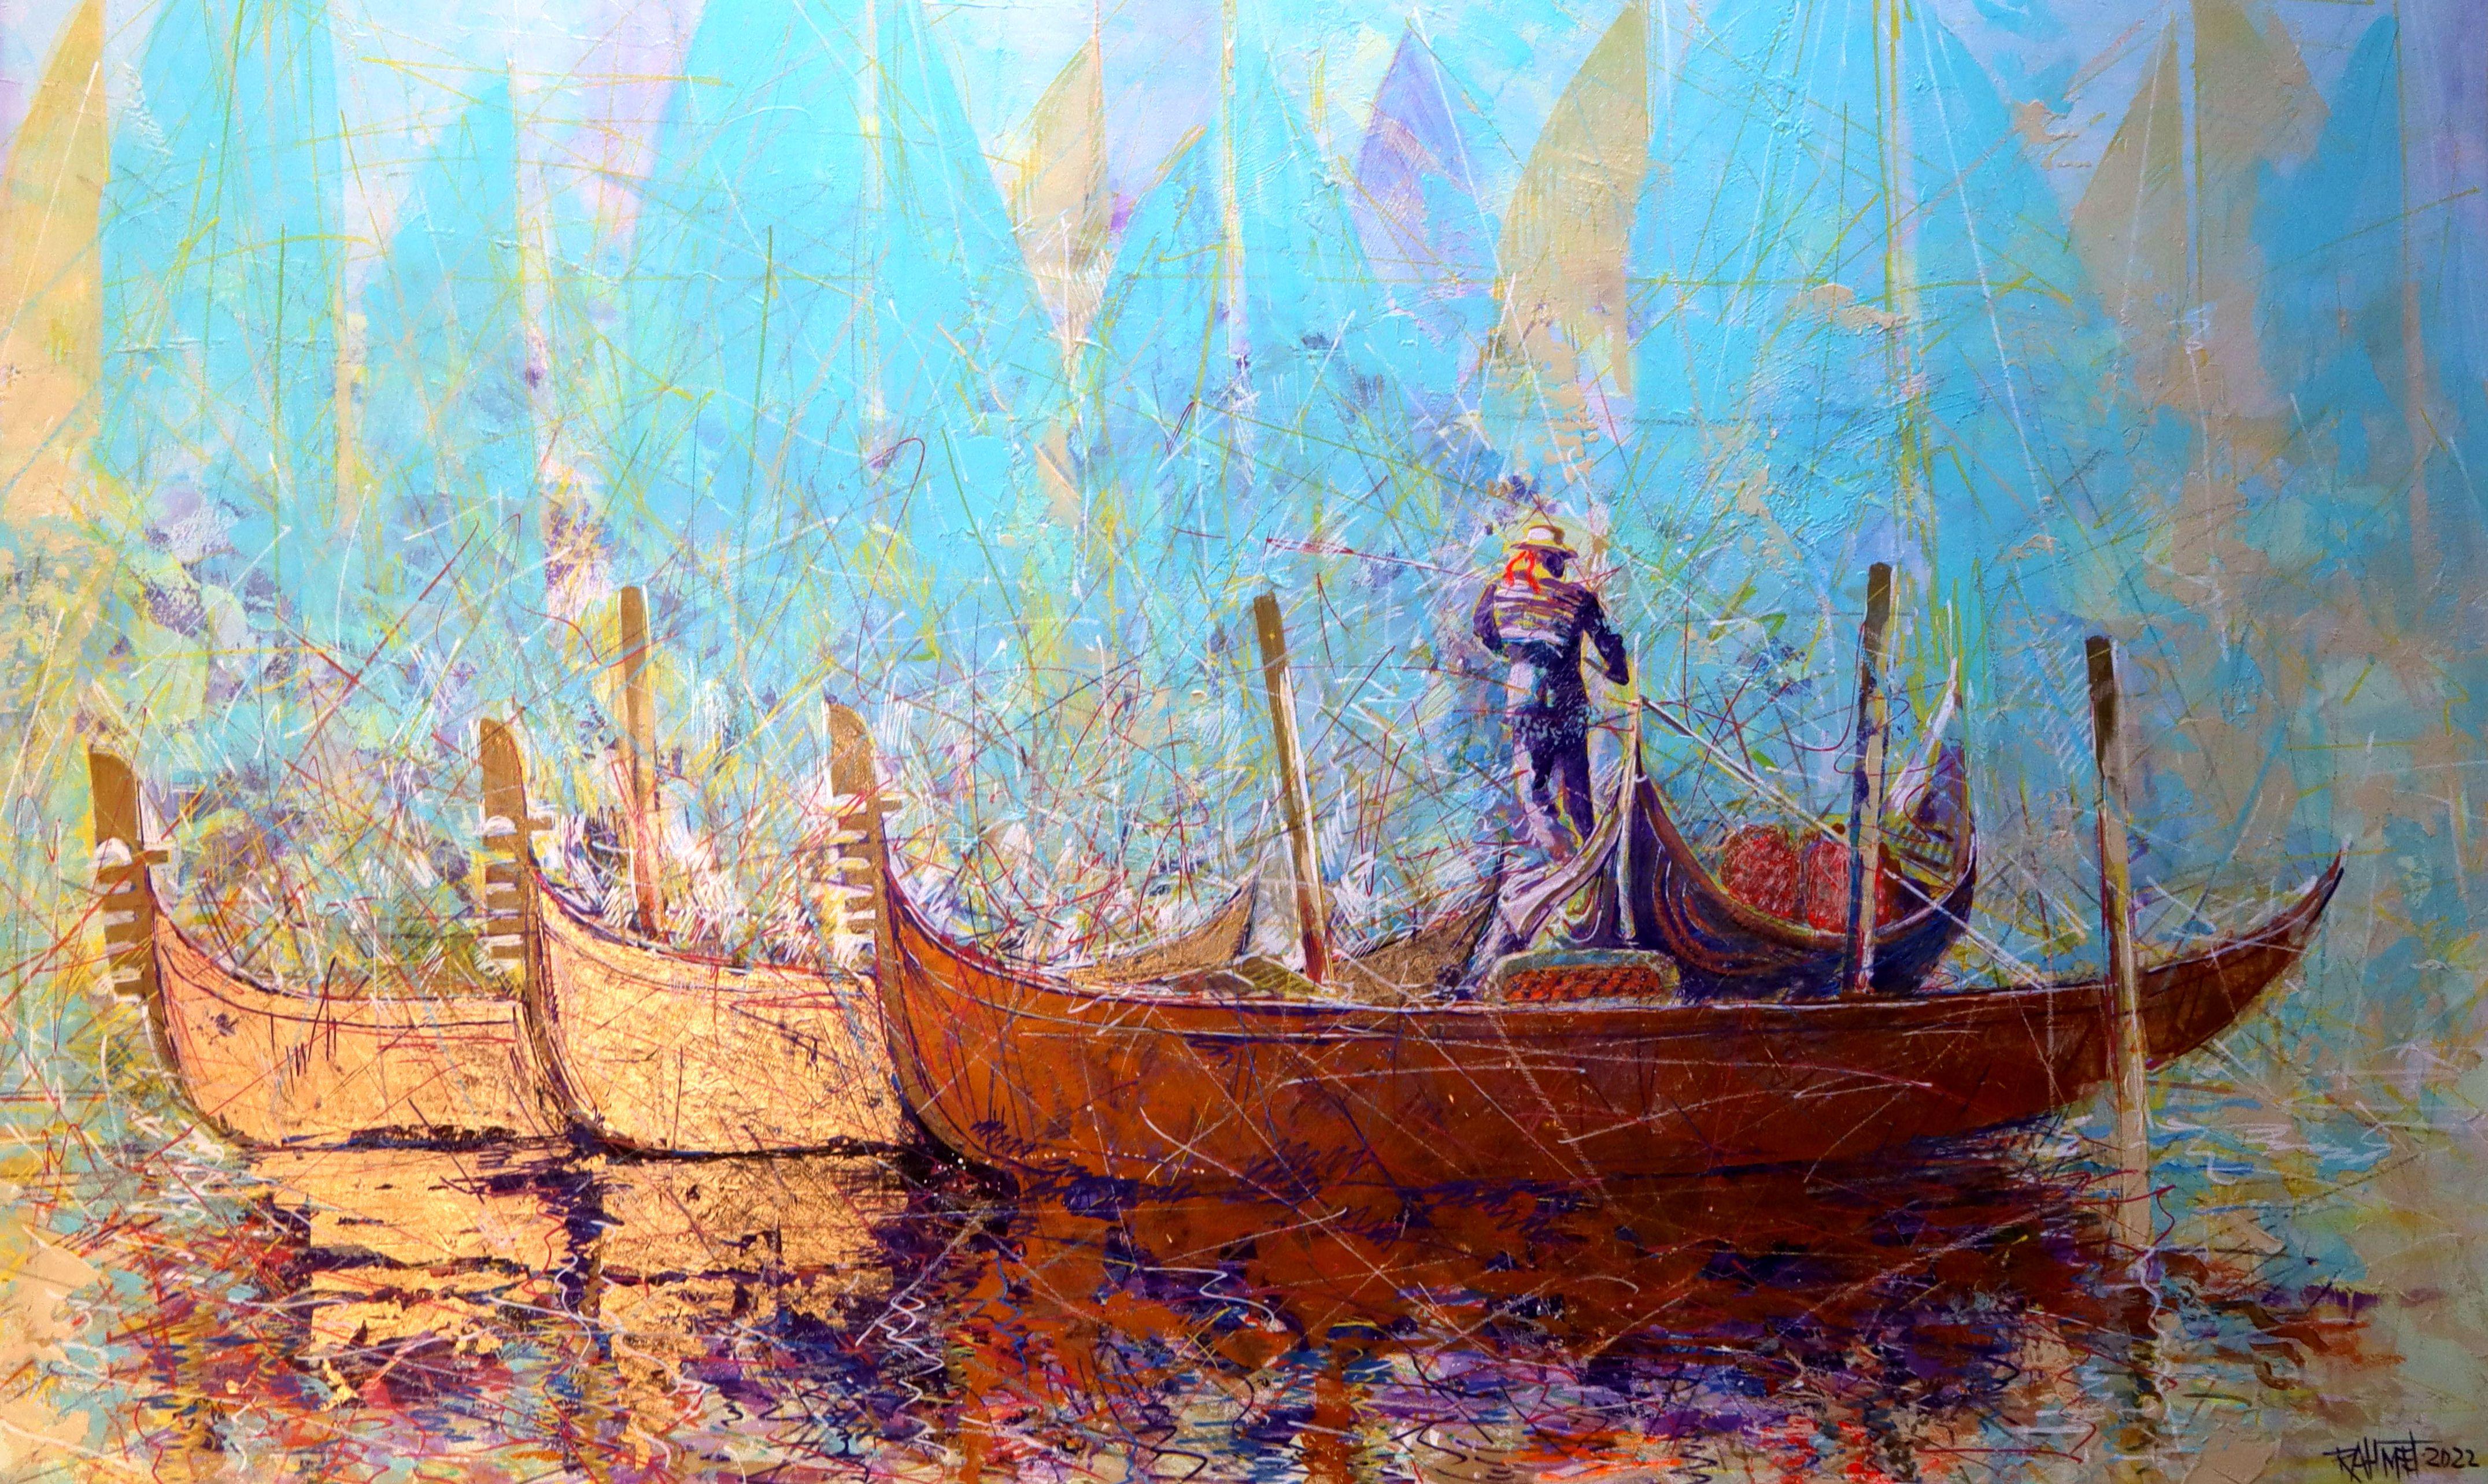 In this emotive piece, I've blended acrylics, oils, and pastels to evoke the serene beauty of a Venetian scene. Expressionist vigor meets Impressionist harmony as ethereal sails intersect with the tangible grace of the boats. It's a dance of light